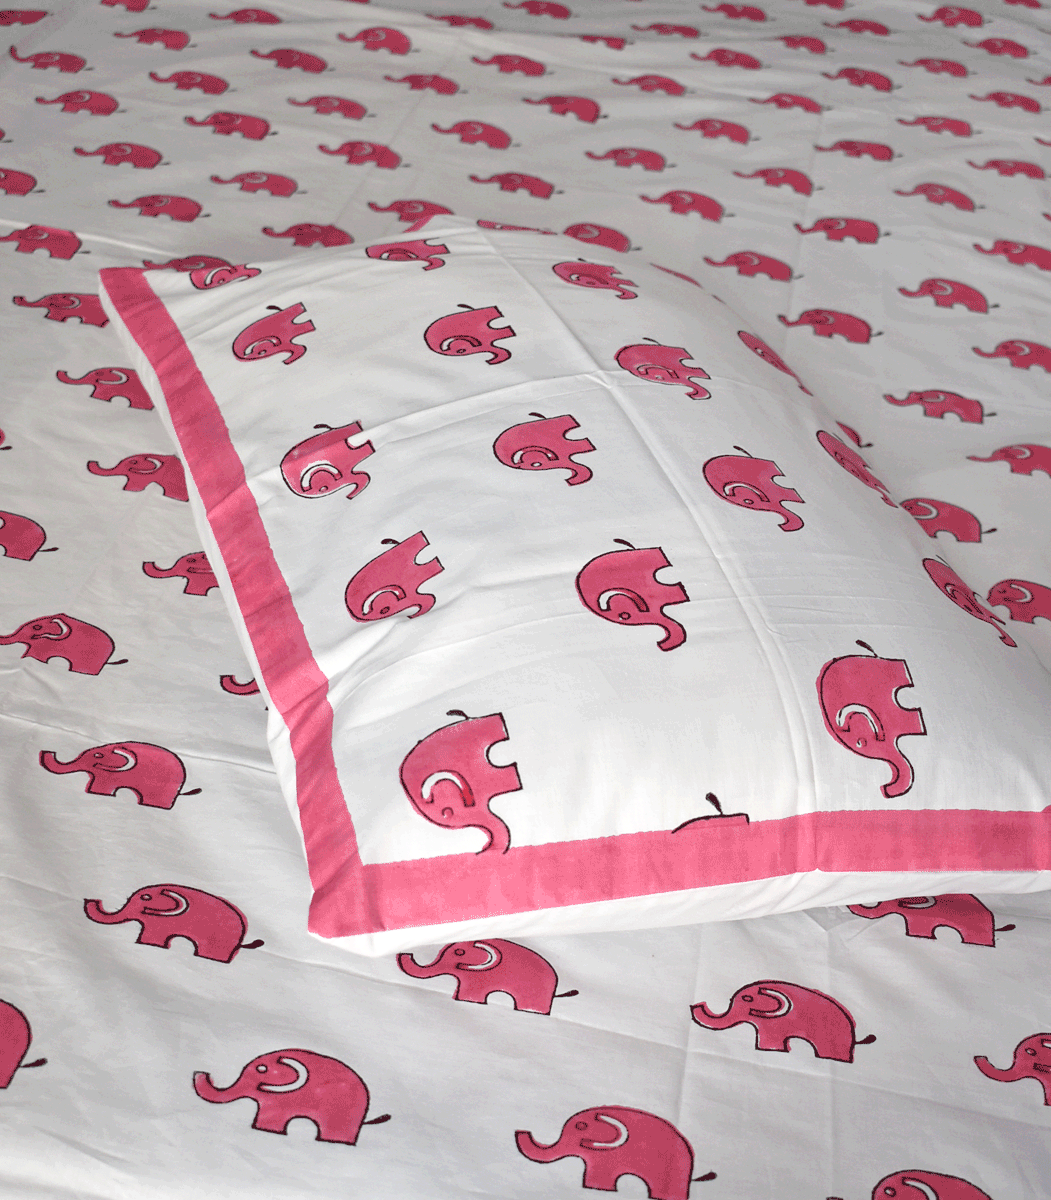 Hand block printed Percale cotton Single Bed sheet with Single ( 1 ) pillow cover for Kids room